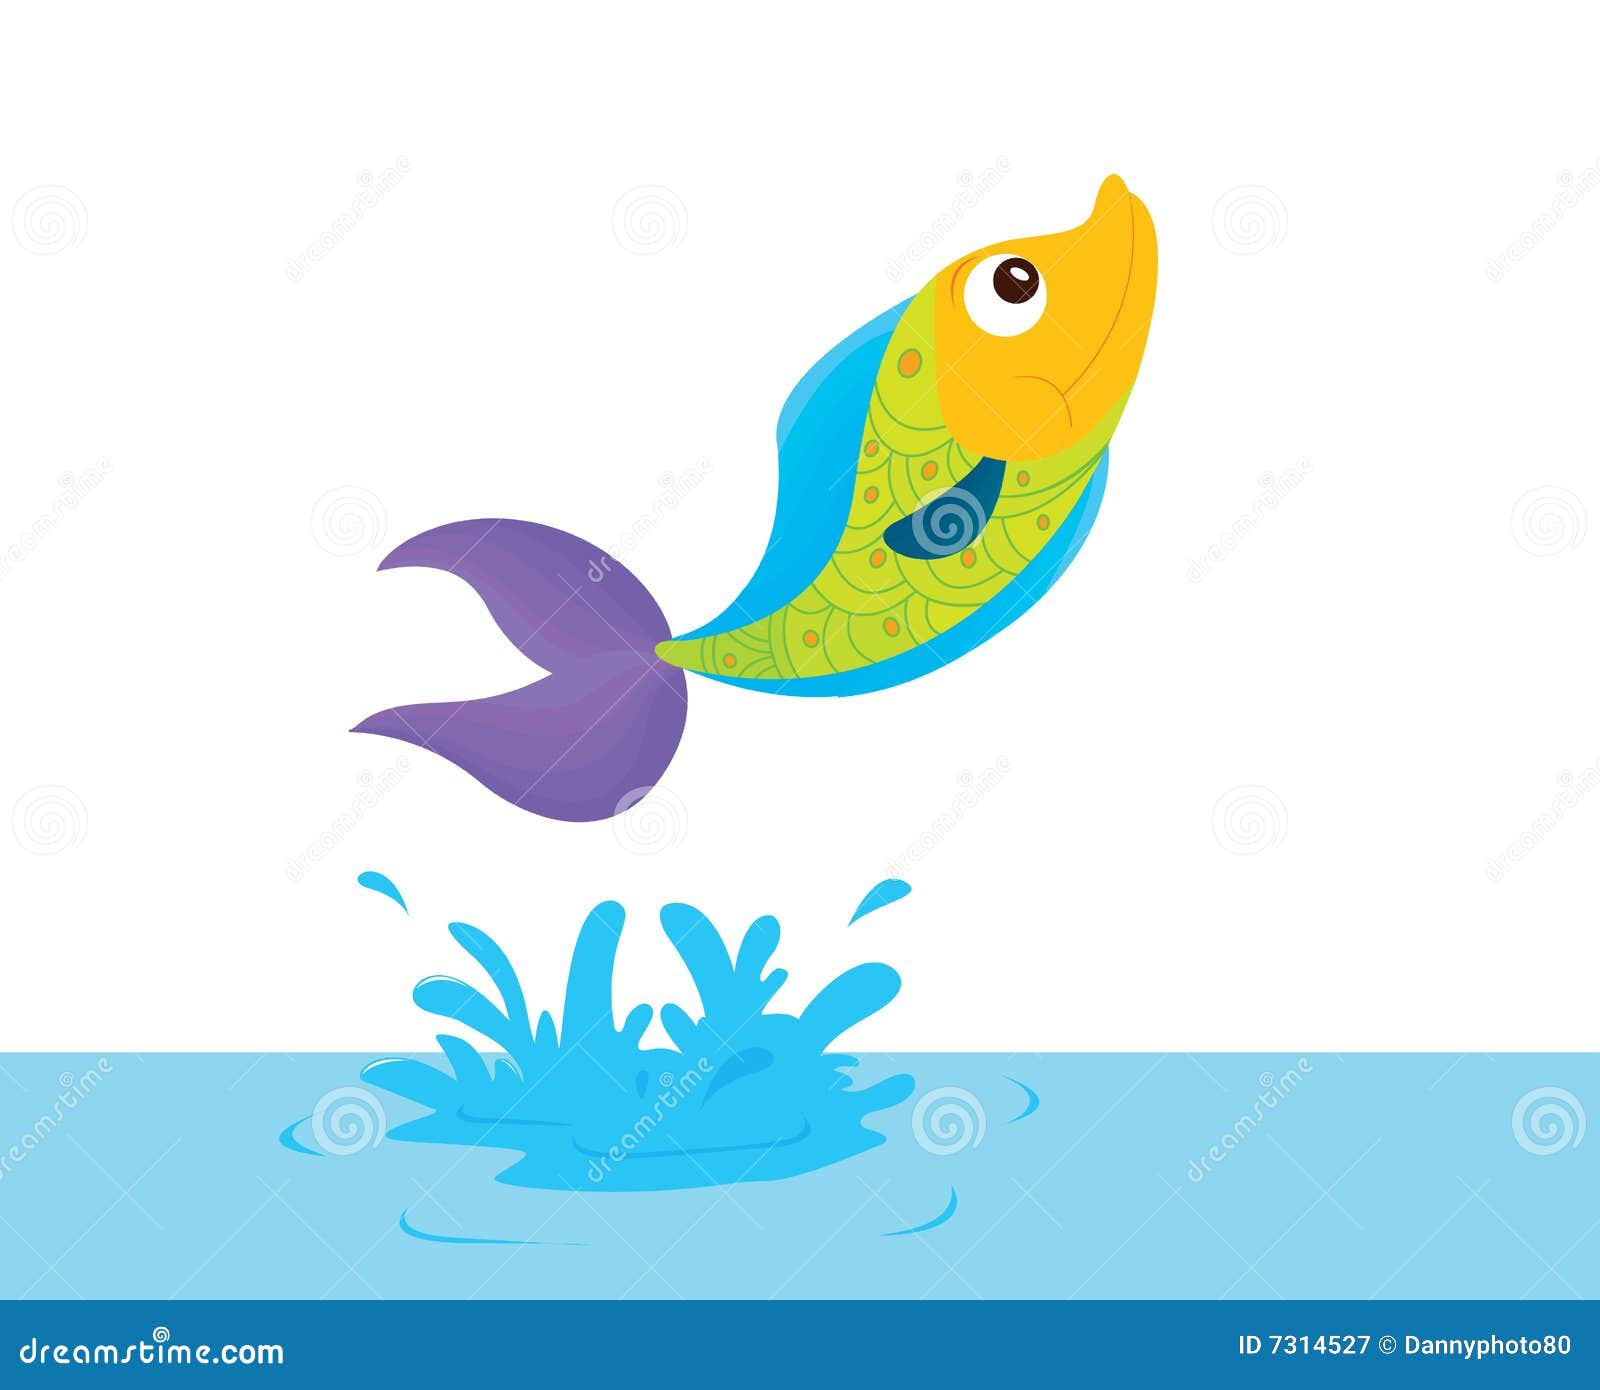 clipart of fish in water - photo #48